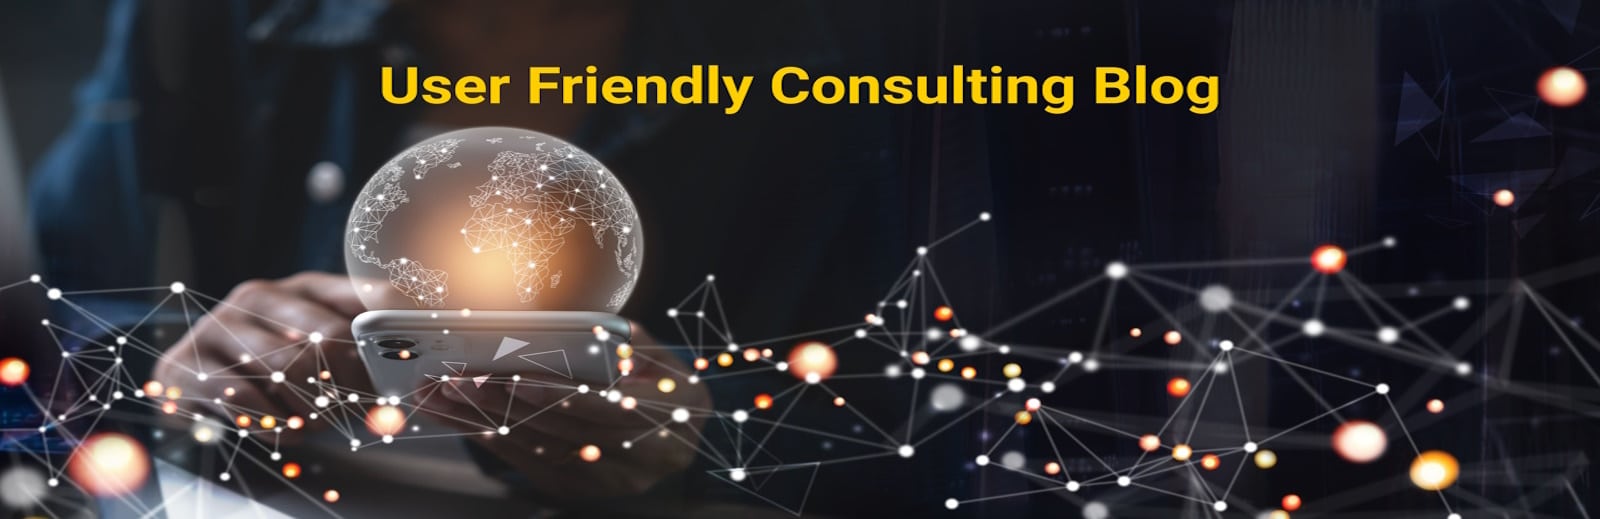 abstract pattern image showing words "User friendly consulting blog" on the top of the banner